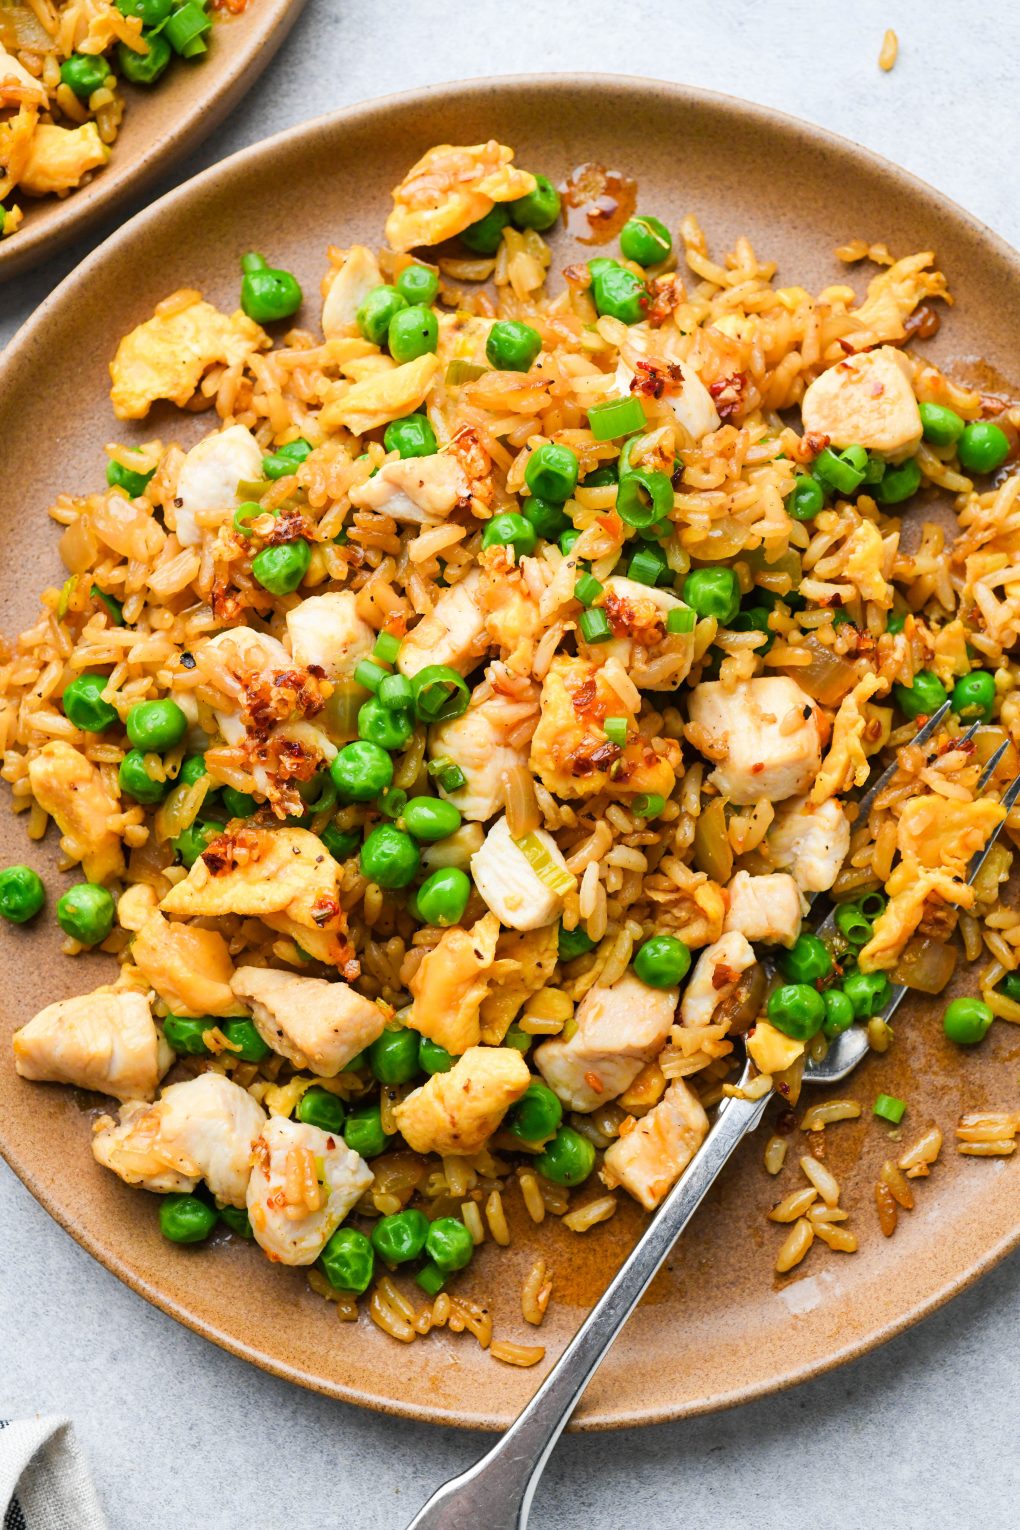 A plate of gluten free chicken fried rice garnished with green onions and chili oil.